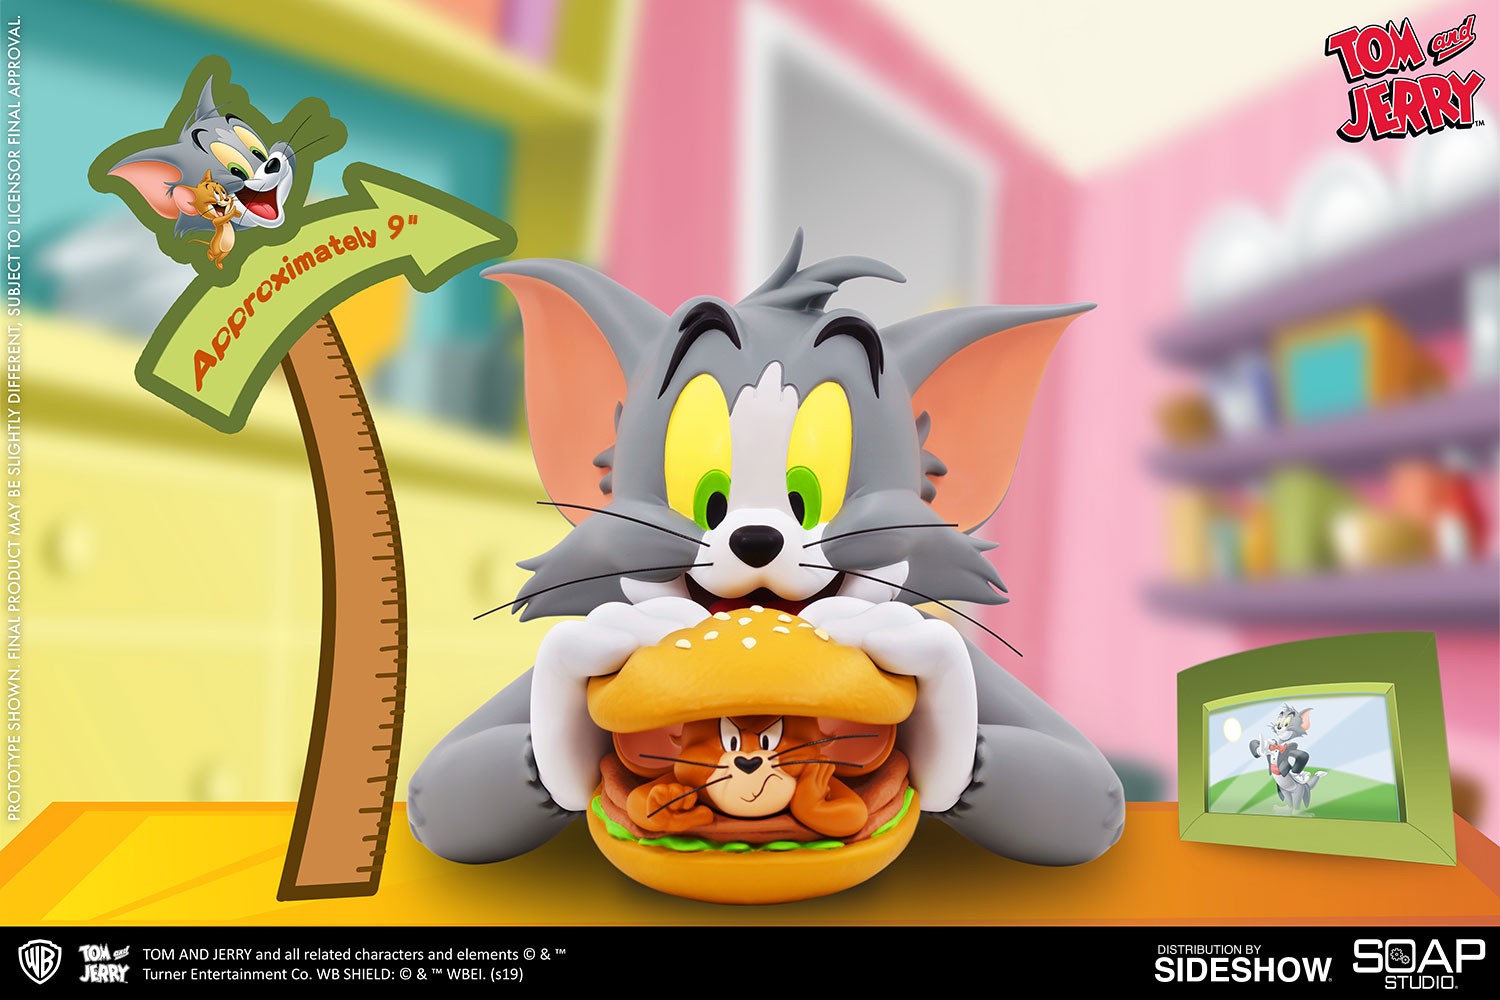 Soap Studio Burger and | Bust Tom Sideshow Jerry Collectibles